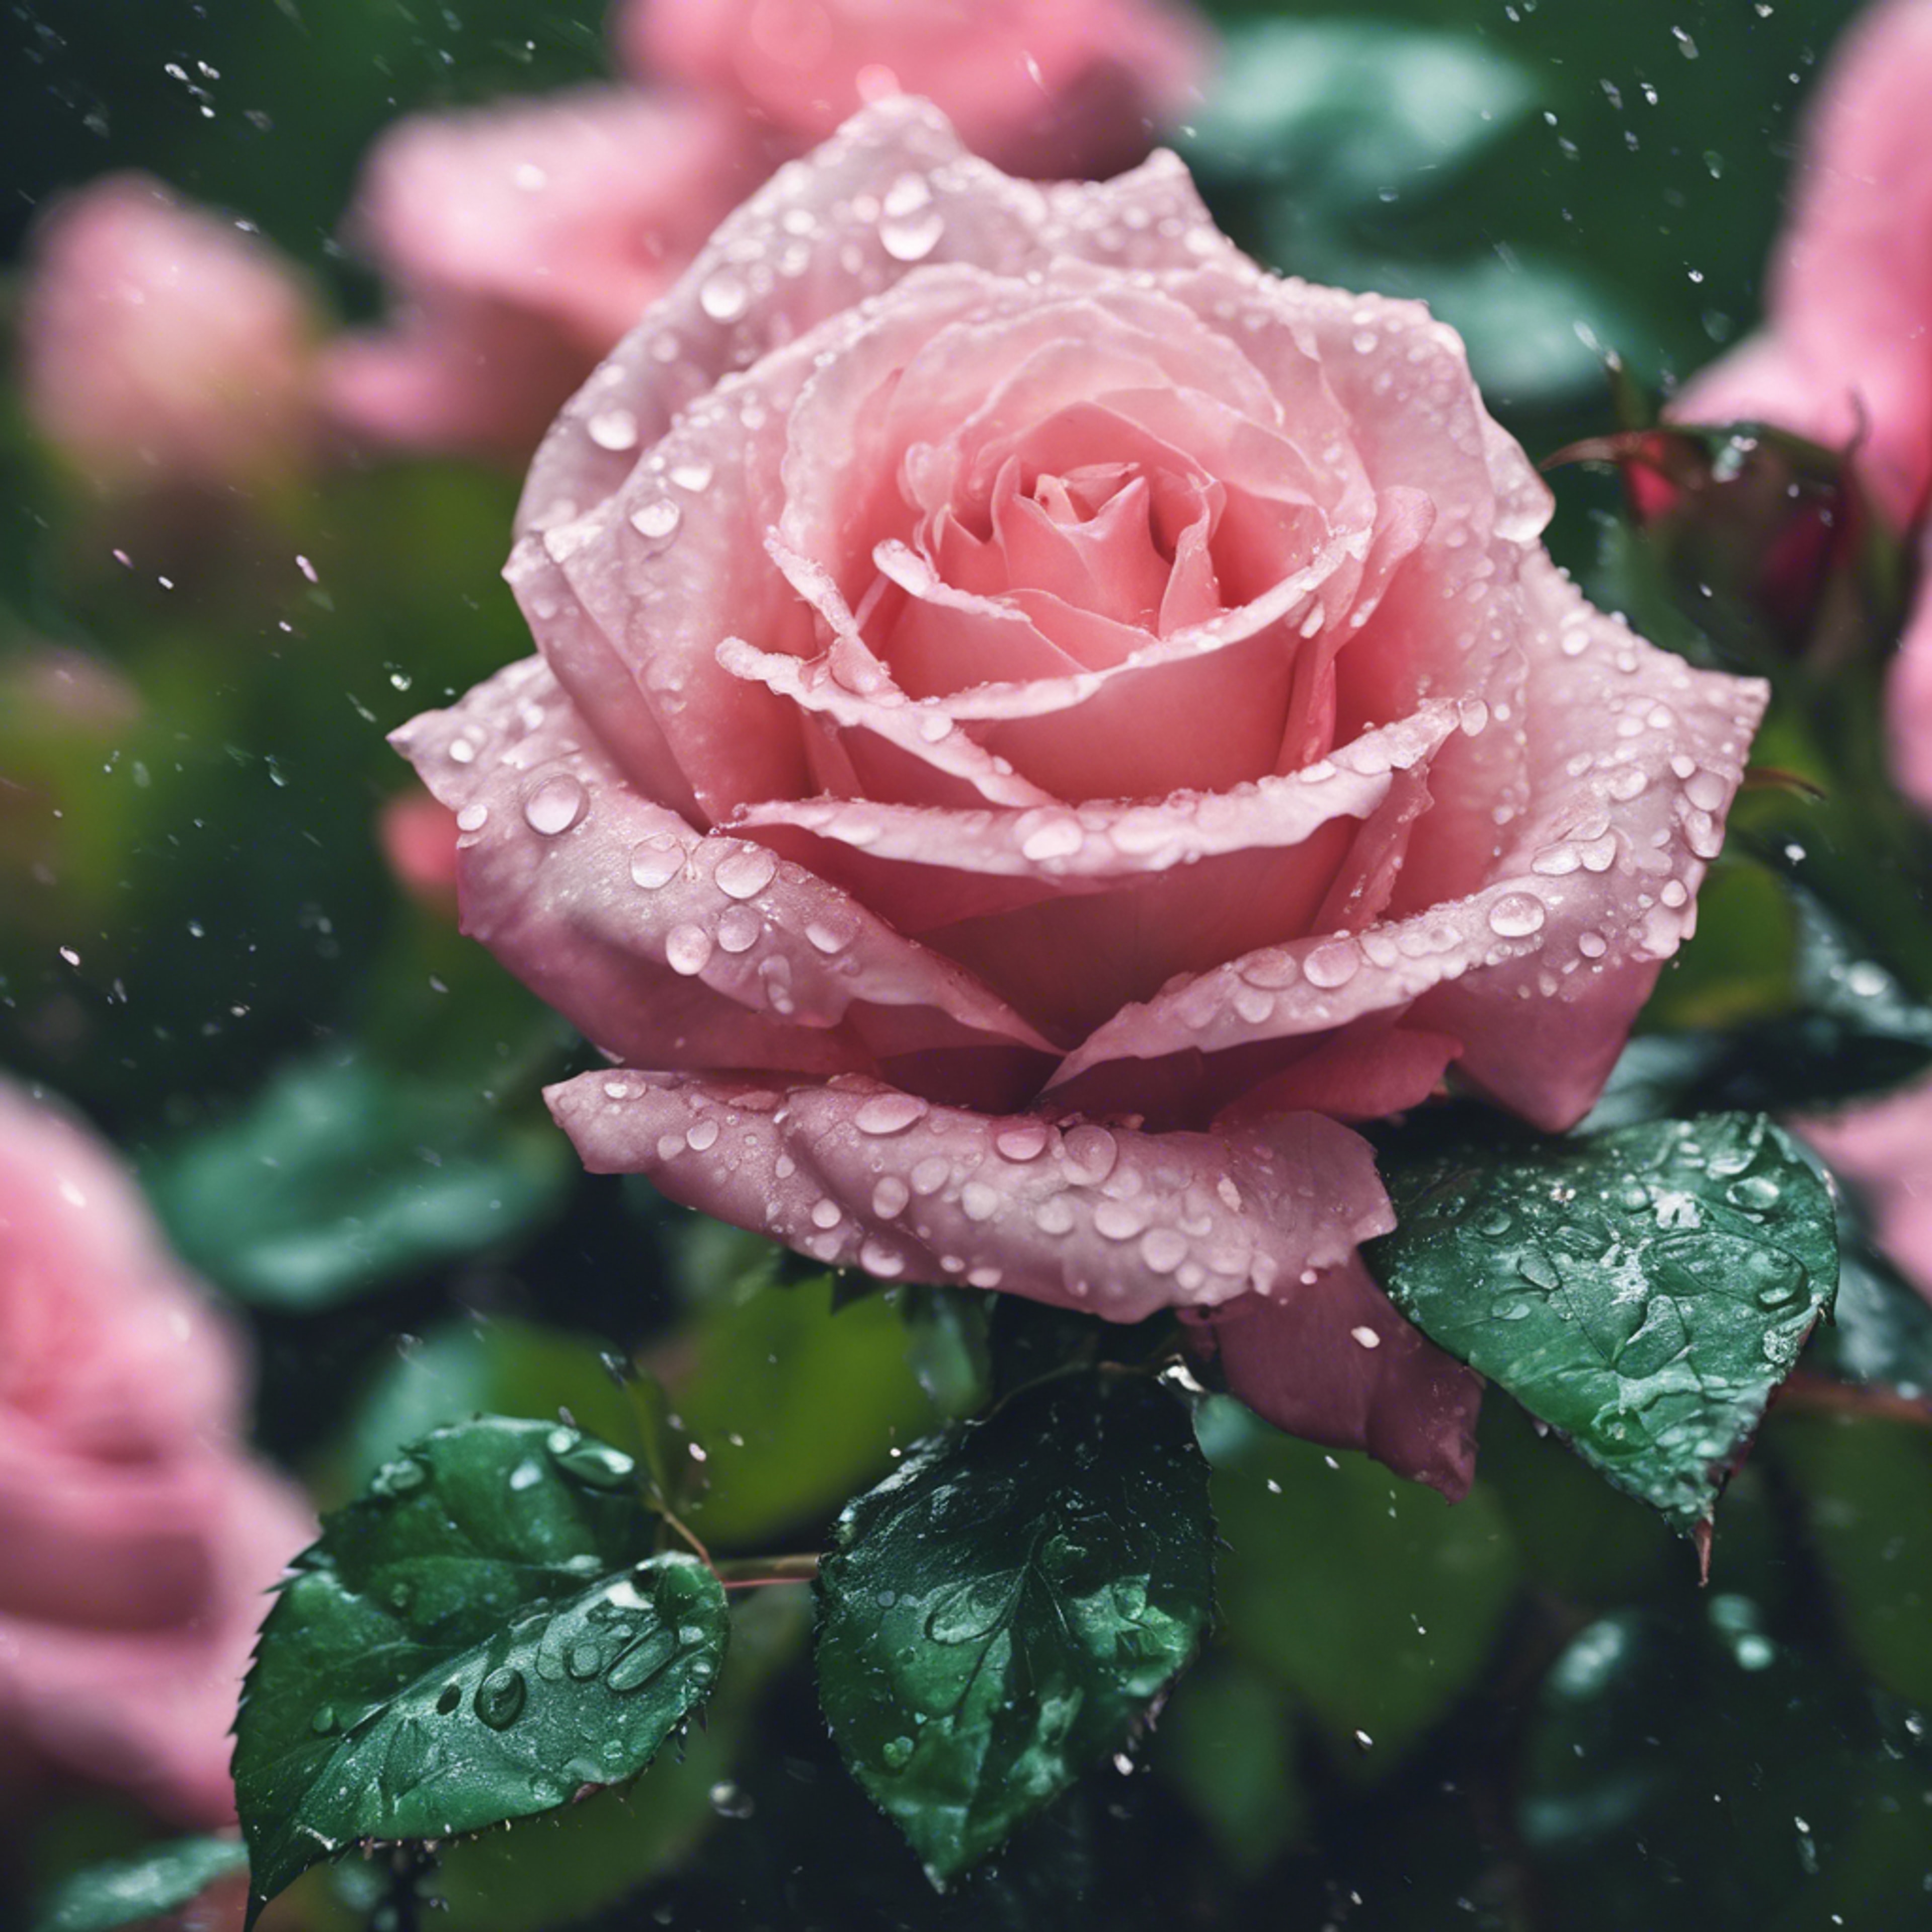 Gentle rain falling on the bright green leaves and pink roses. טפט[2479f95970de45b492b9]